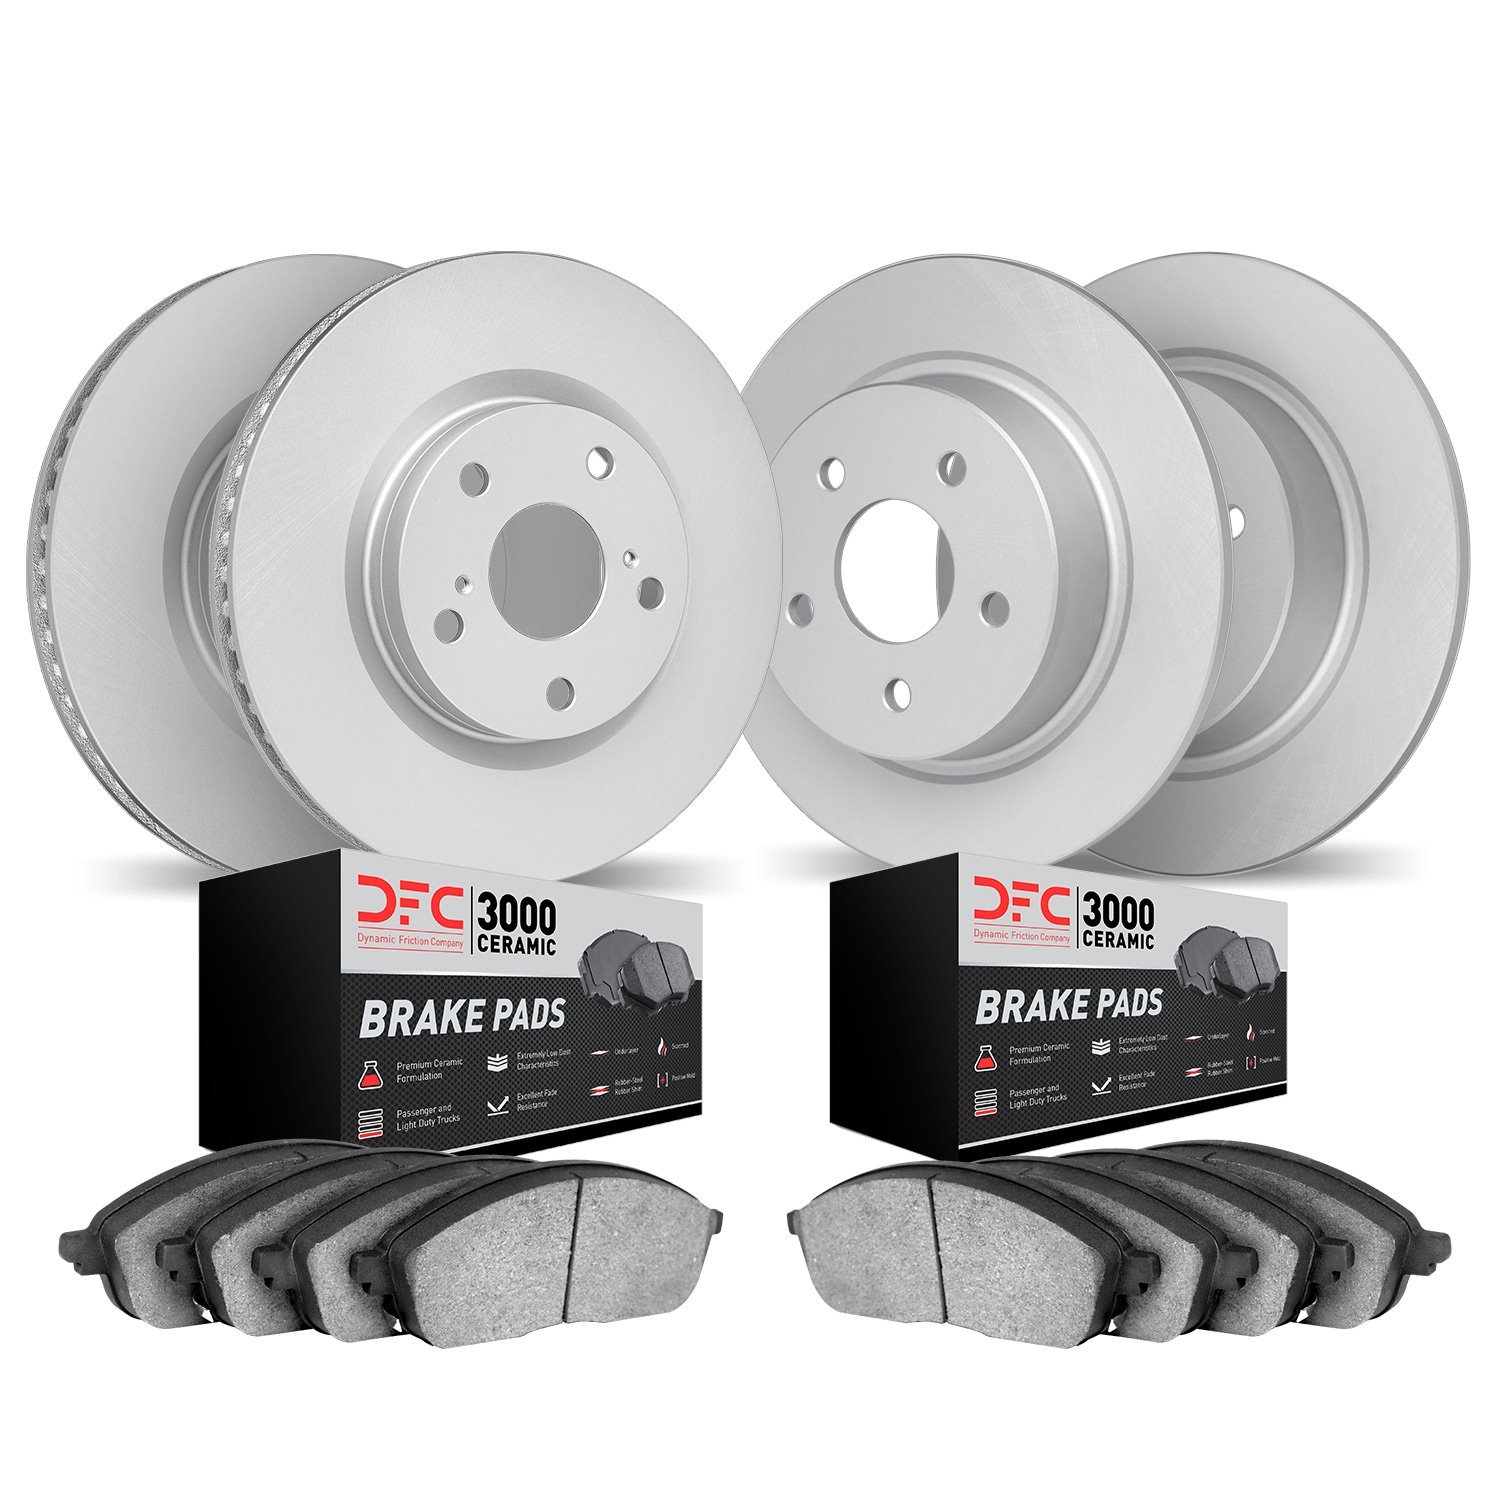 4304-74012 Geospec Brake Rotors with 3000-Series Ceramic Brake Pads Kit, 1998-2015 Audi/Volkswagen, Position: Front and Rear